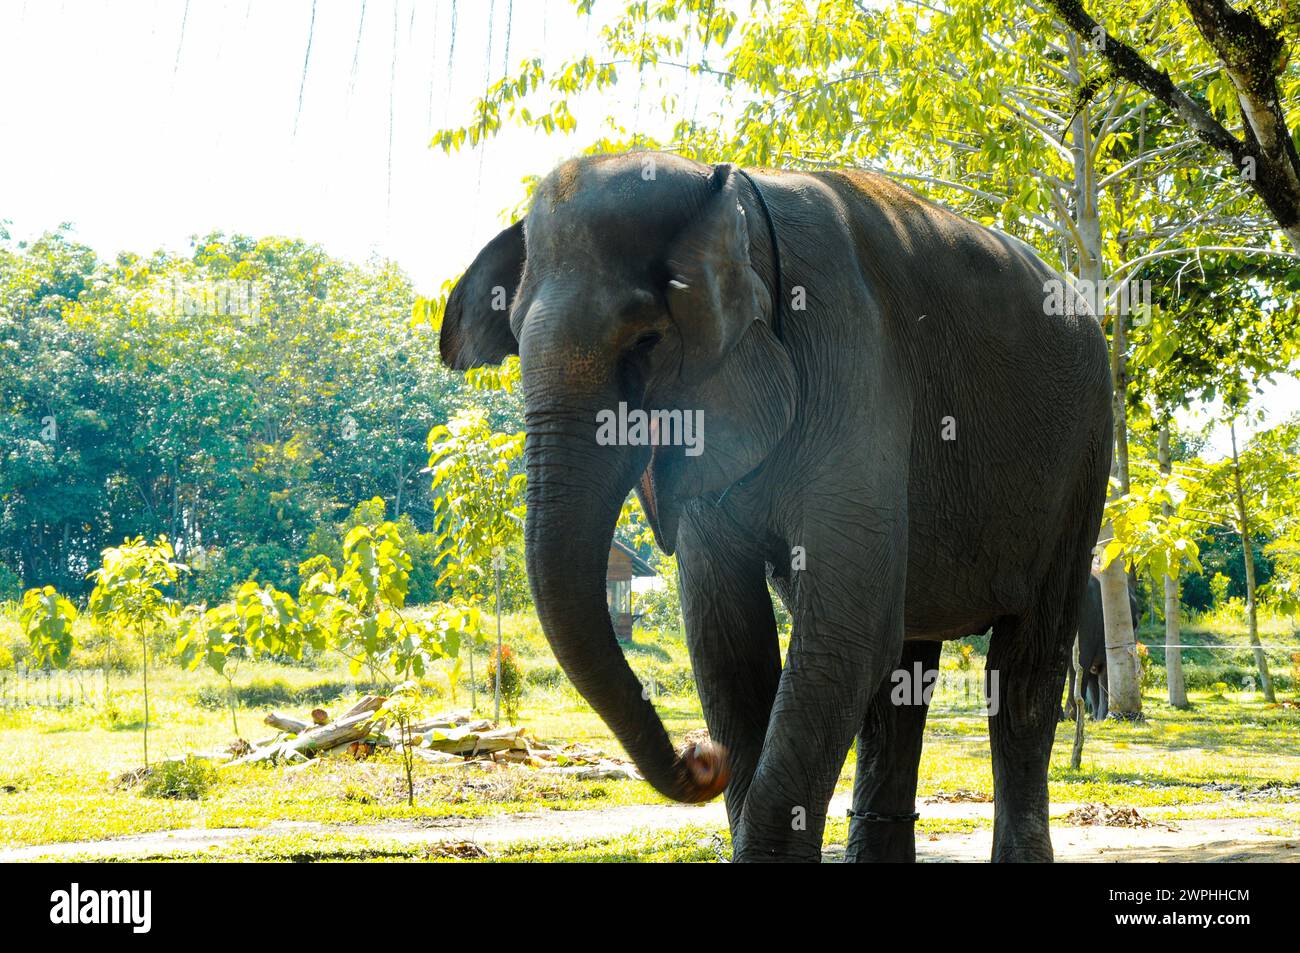 Mister Elephant Happy in The Jungle Stock Photo